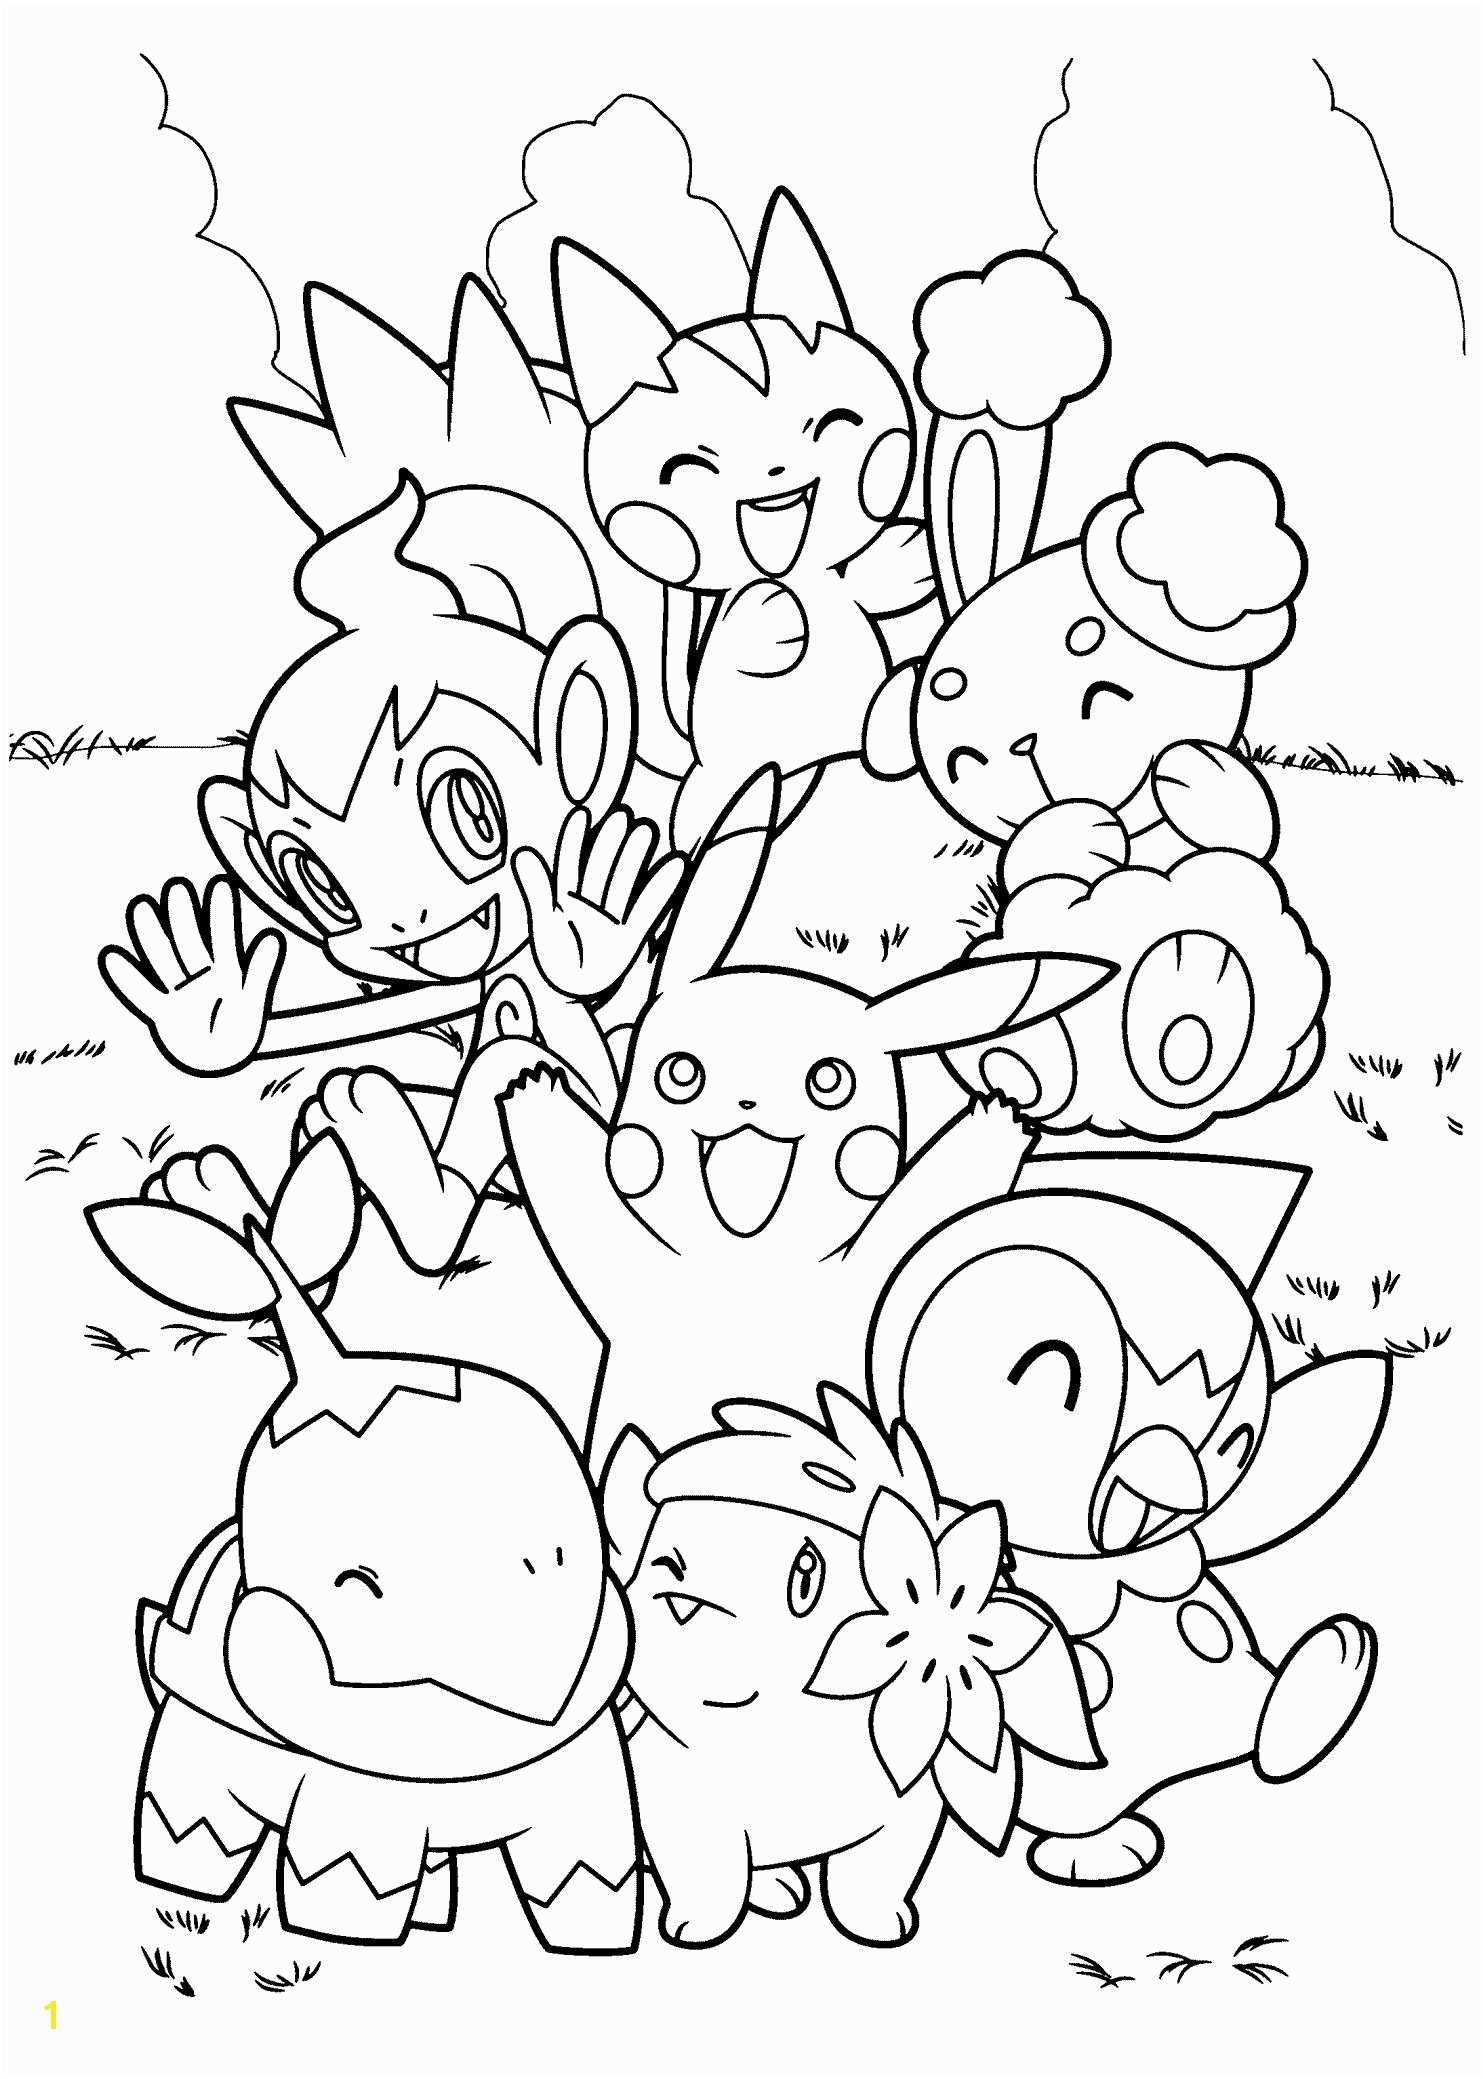 Legendary Pokemon Printable Coloring Pages top 75 Free Printable Pokemon Coloring Pages Line